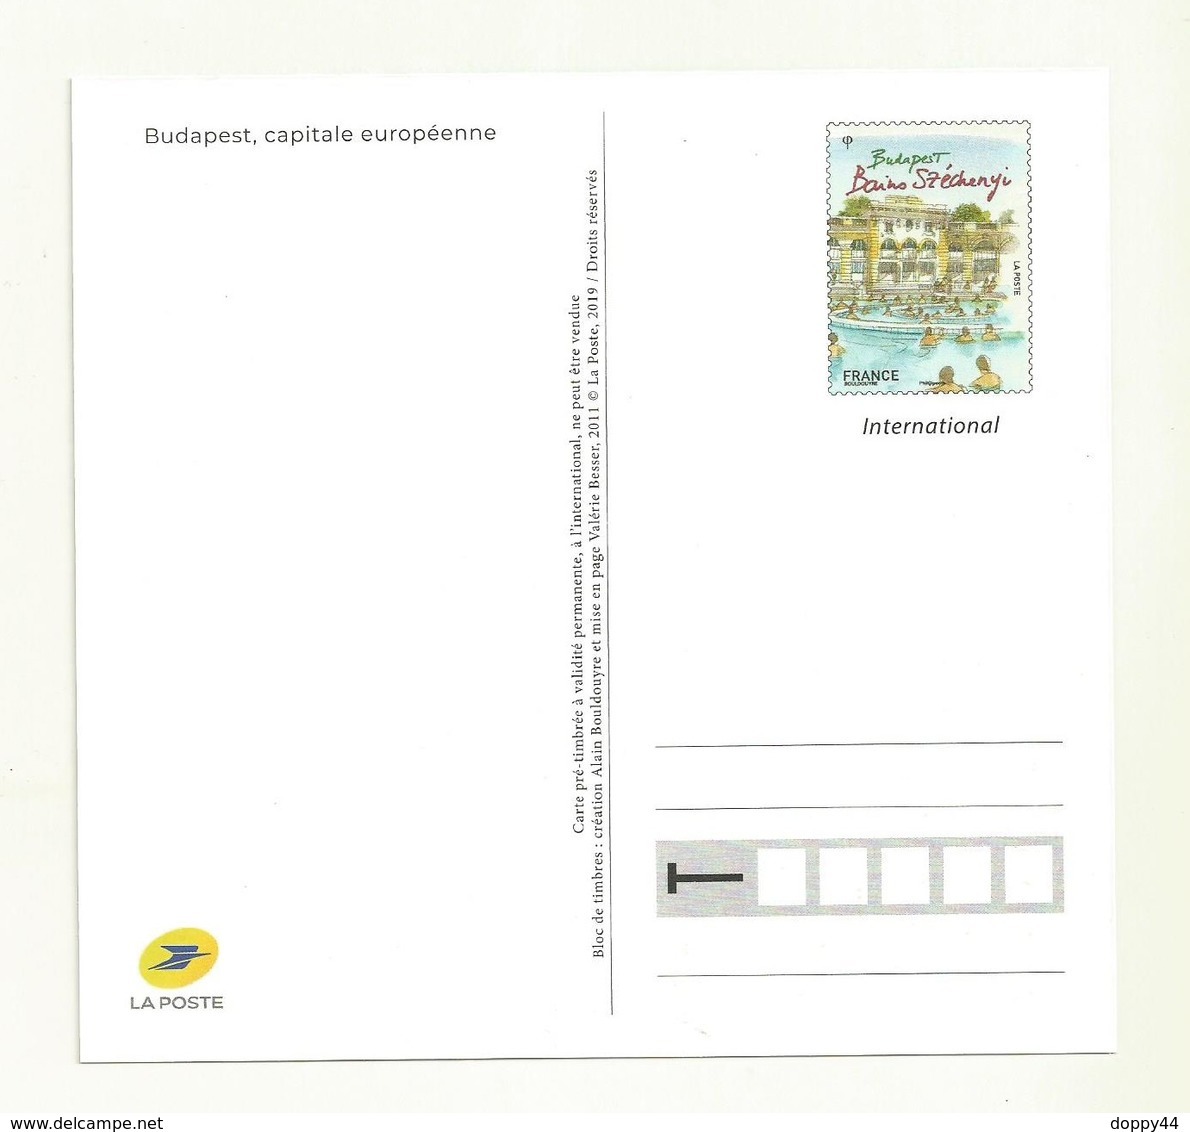 PAP LA POSTE CAPITALES EUROPEENNES BUDAPEST. - Official Stationery